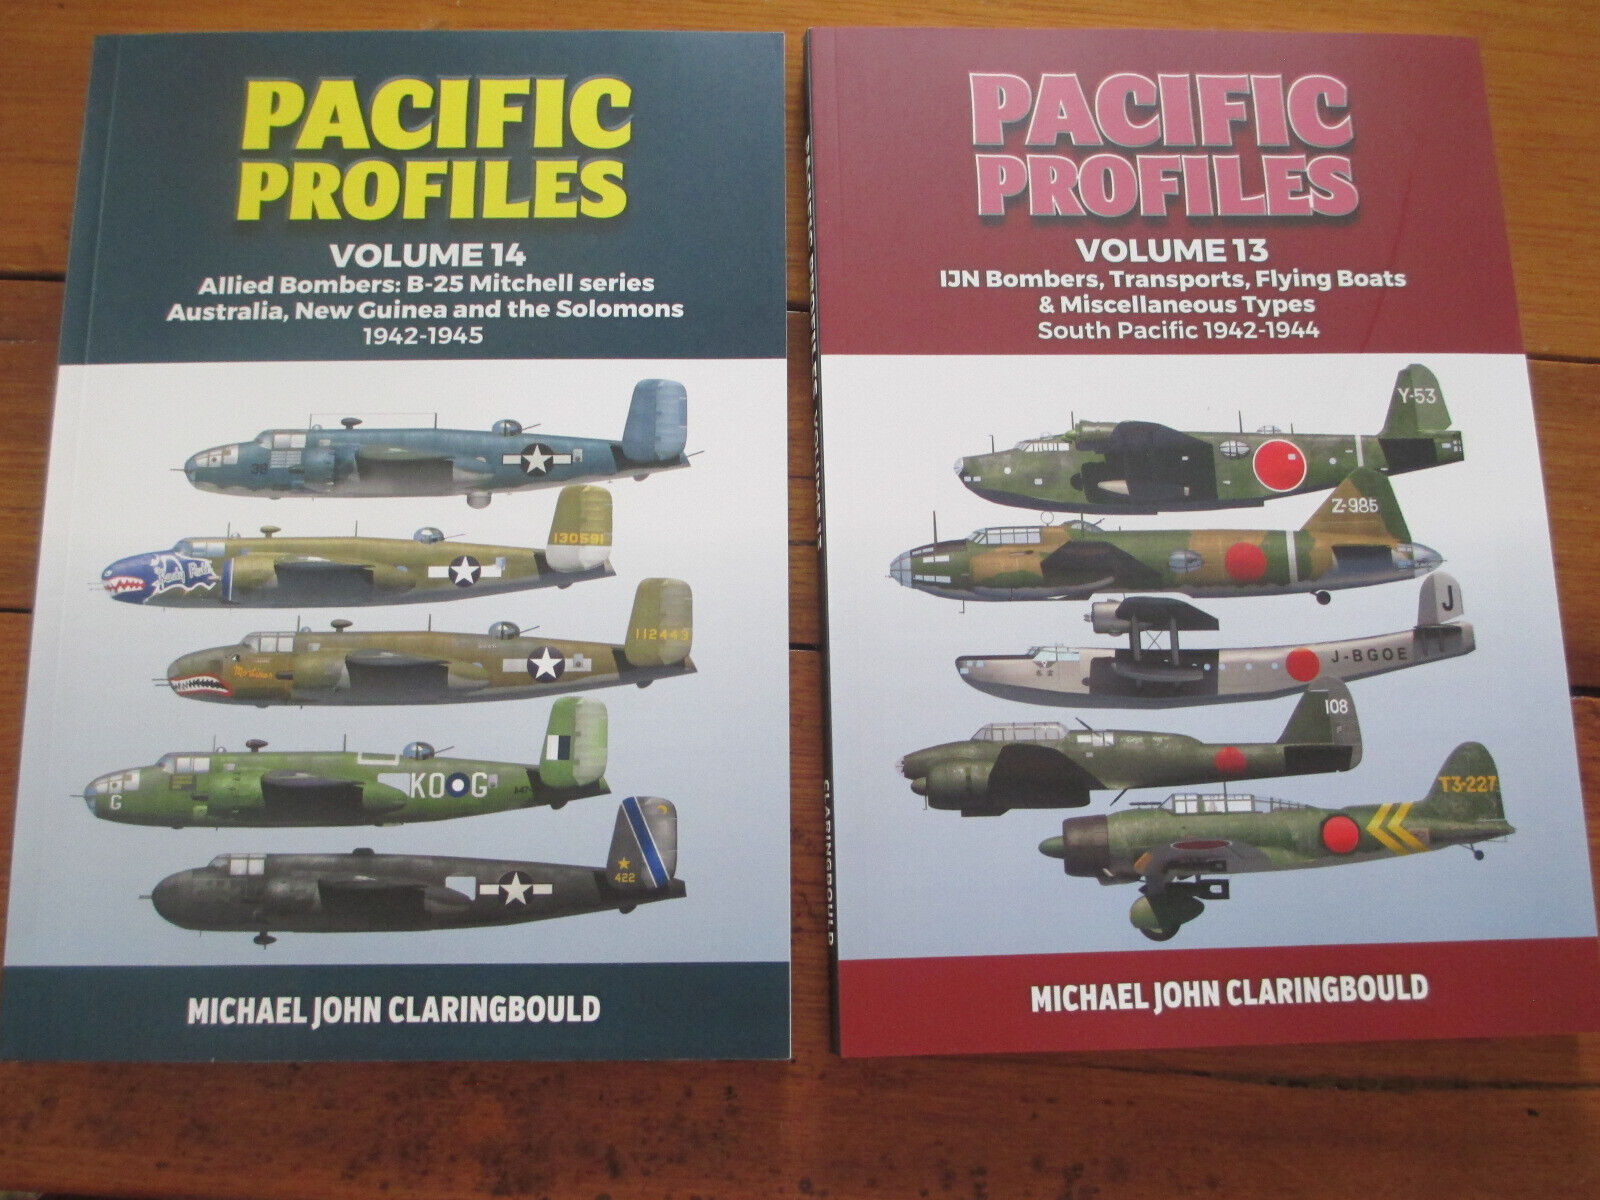 Pacific Profiles Volume 13 & 14 - JAPAN Bombers Flying Boats B25 Mitchell Bomber